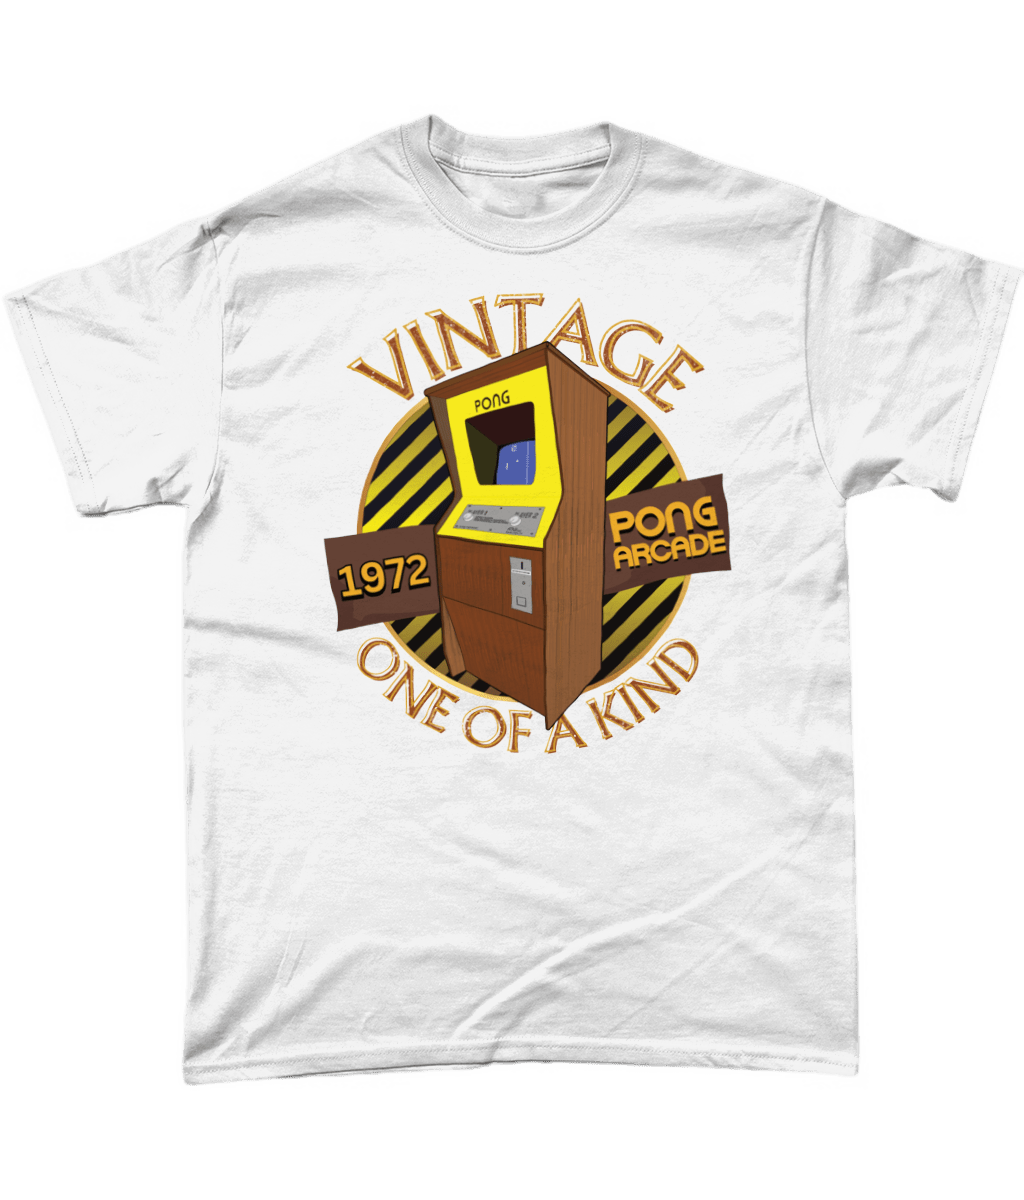 White T-Shirt with words vintage,1972,pong arcade,one of a kind, image of a pong arcade machine in front of a yellow striped circle